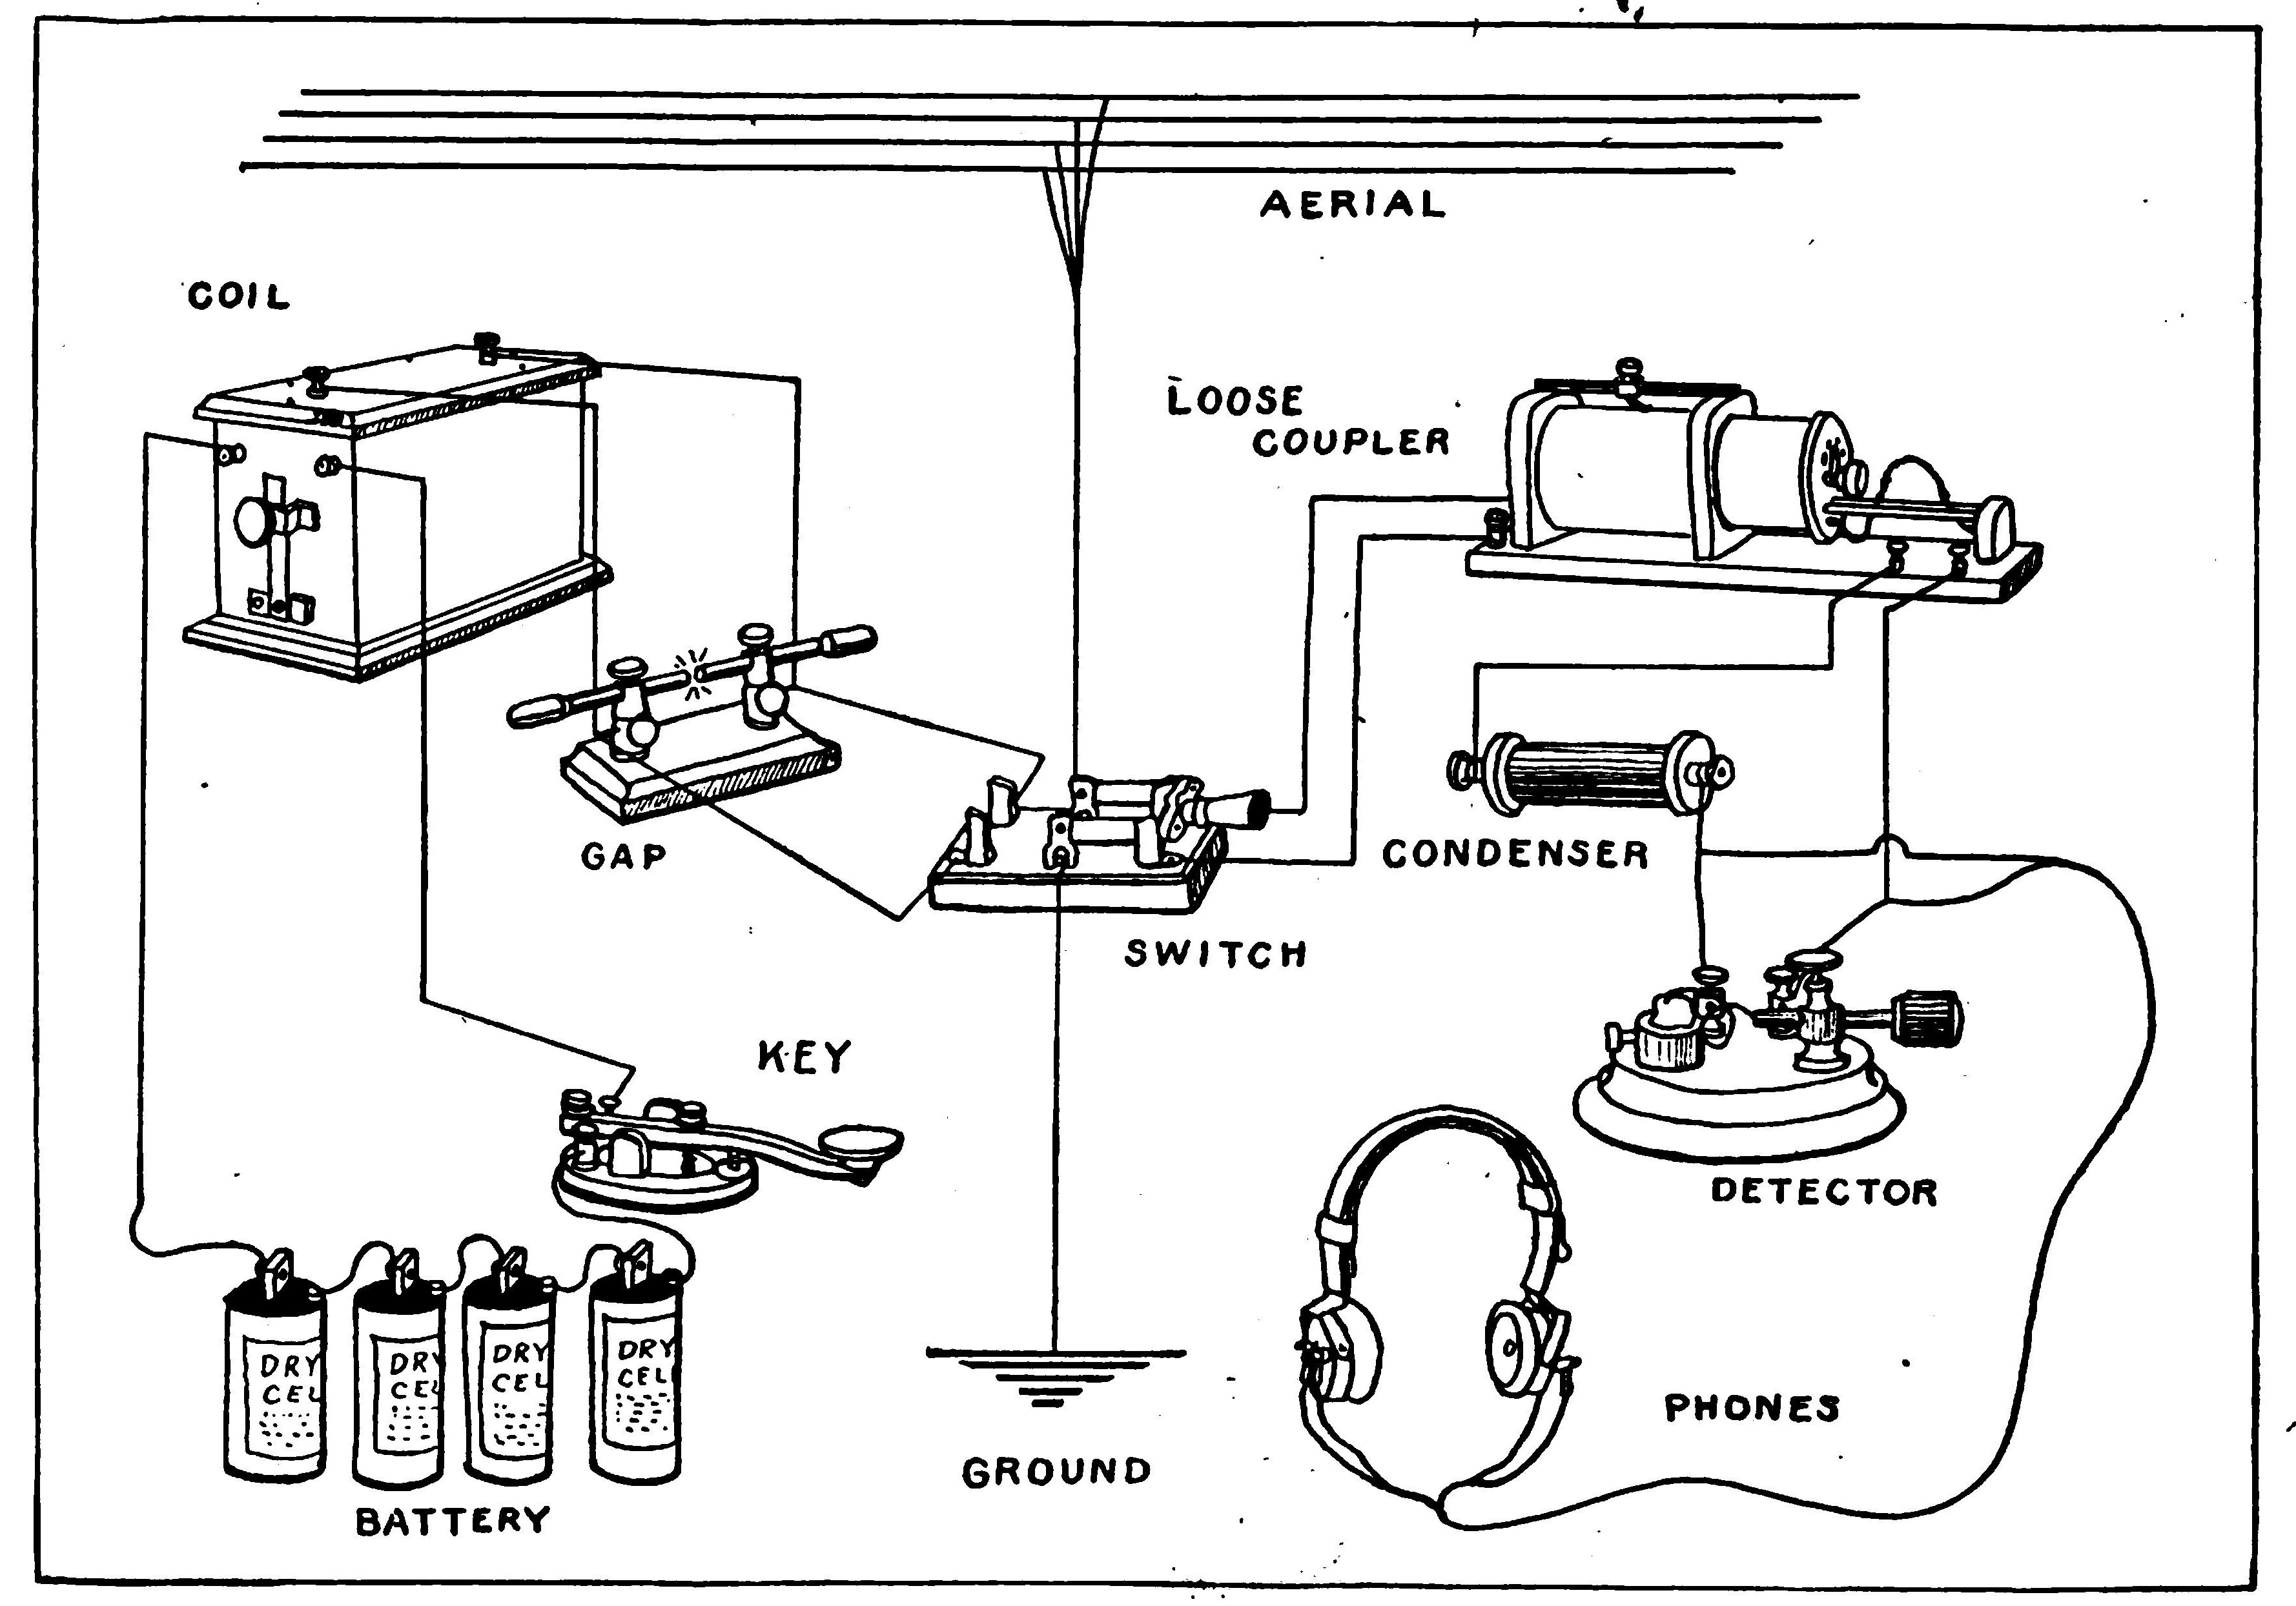 Fig 231.—A Complete Wiring Diagram for both the Transmitter and the Receptor.